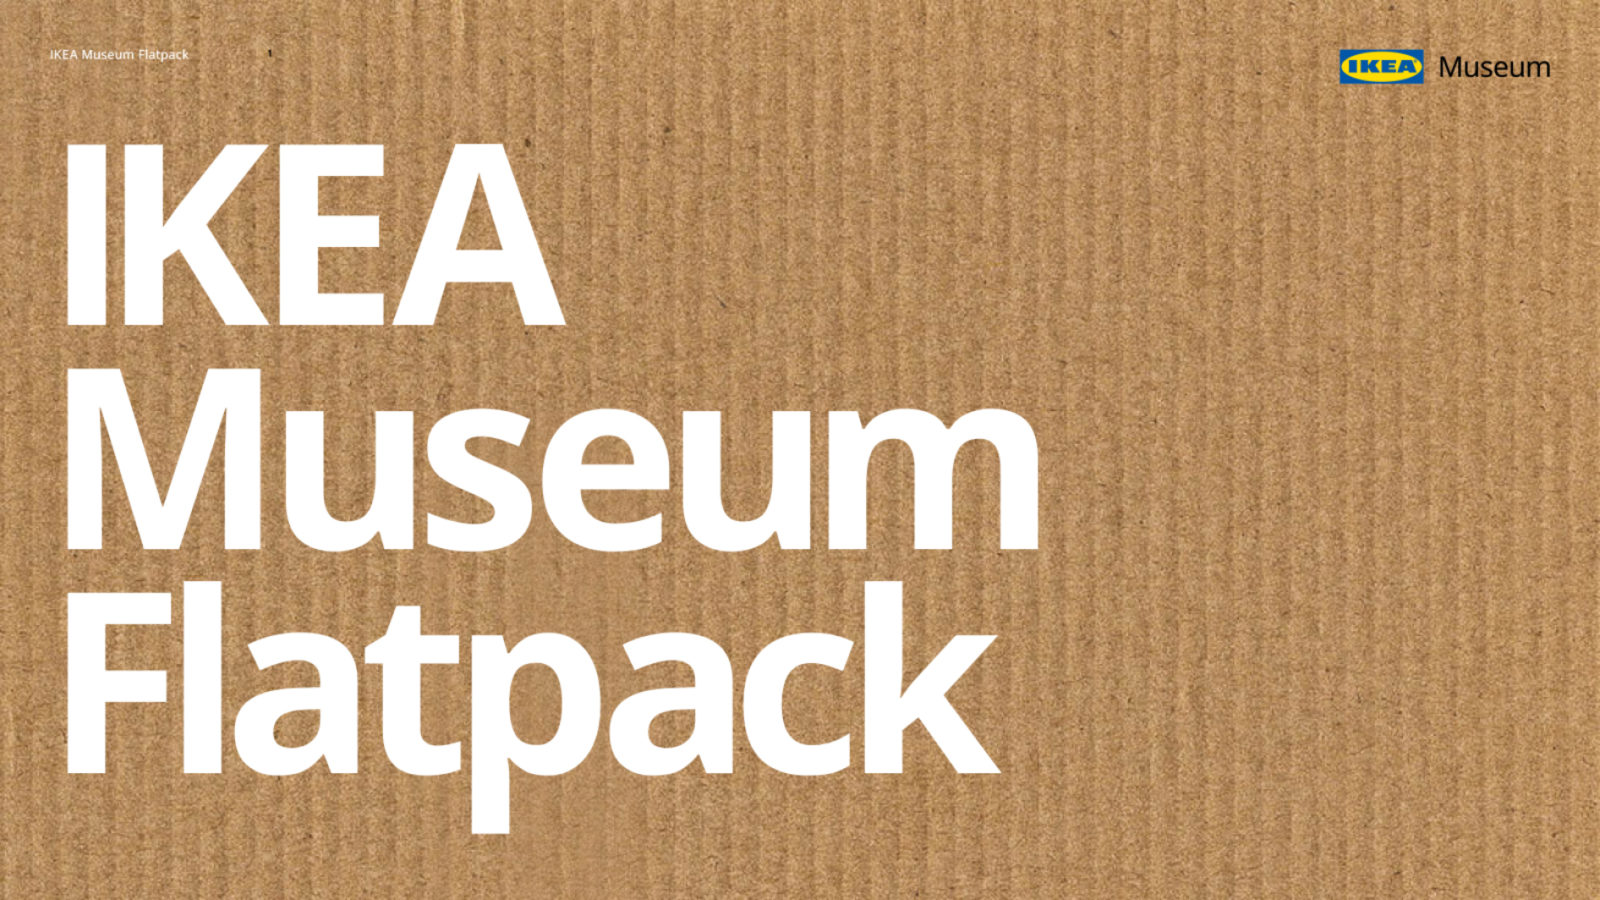 A rectangular piece of brown cardboard, the IKEA Museum logo and “IKEA Museum Flatpack” written on it in a white font.